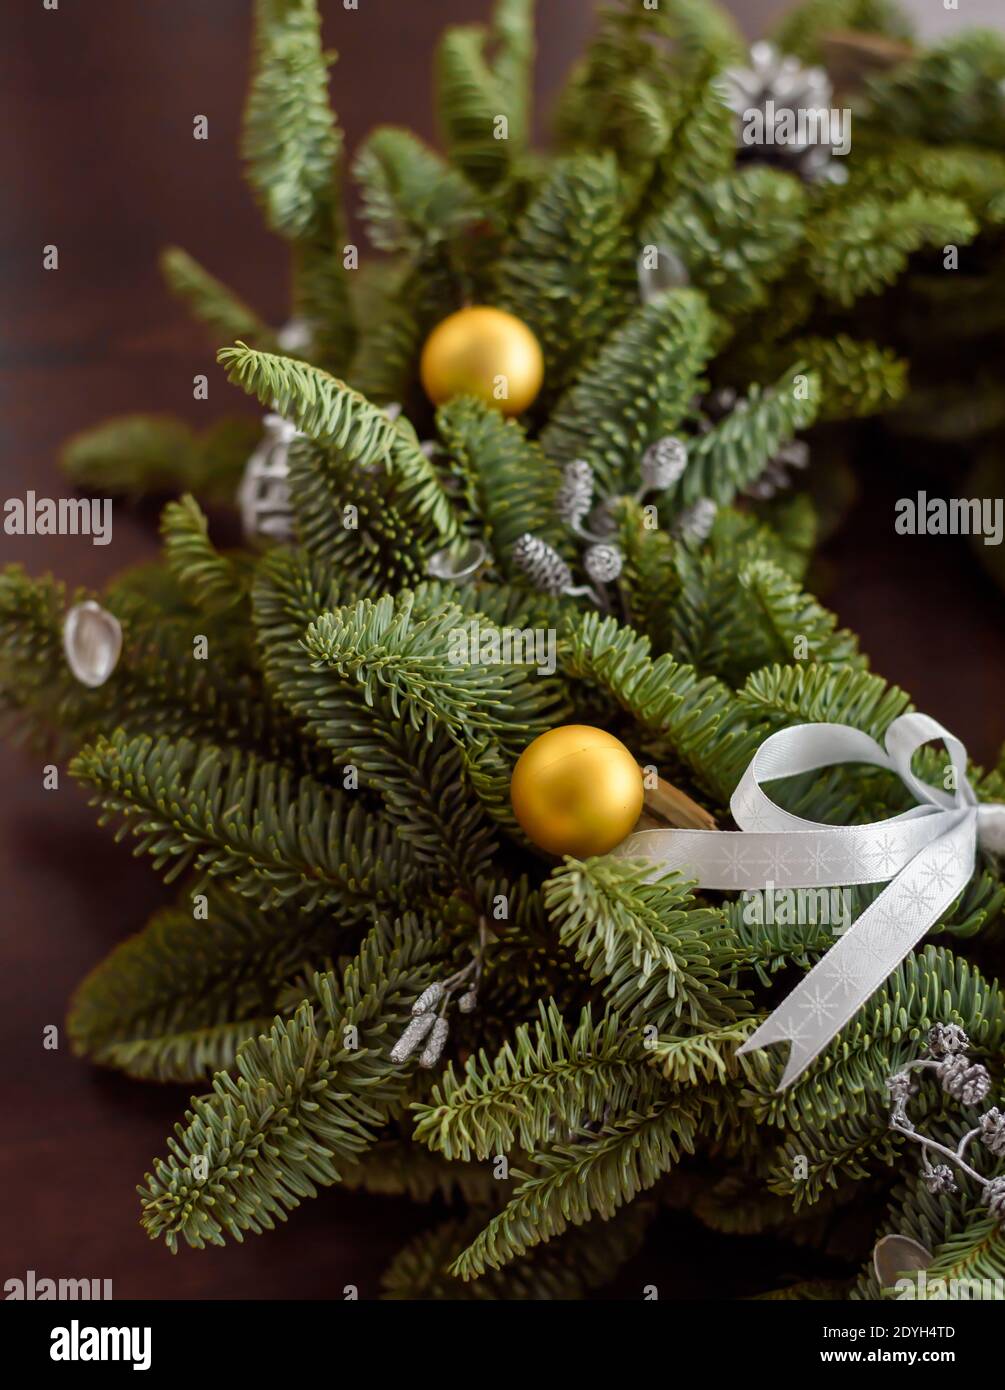 Beauriful green Christmas wreath with golden baubles on a dark wooden surface, 45 degree angle, rich colors Stock Photo